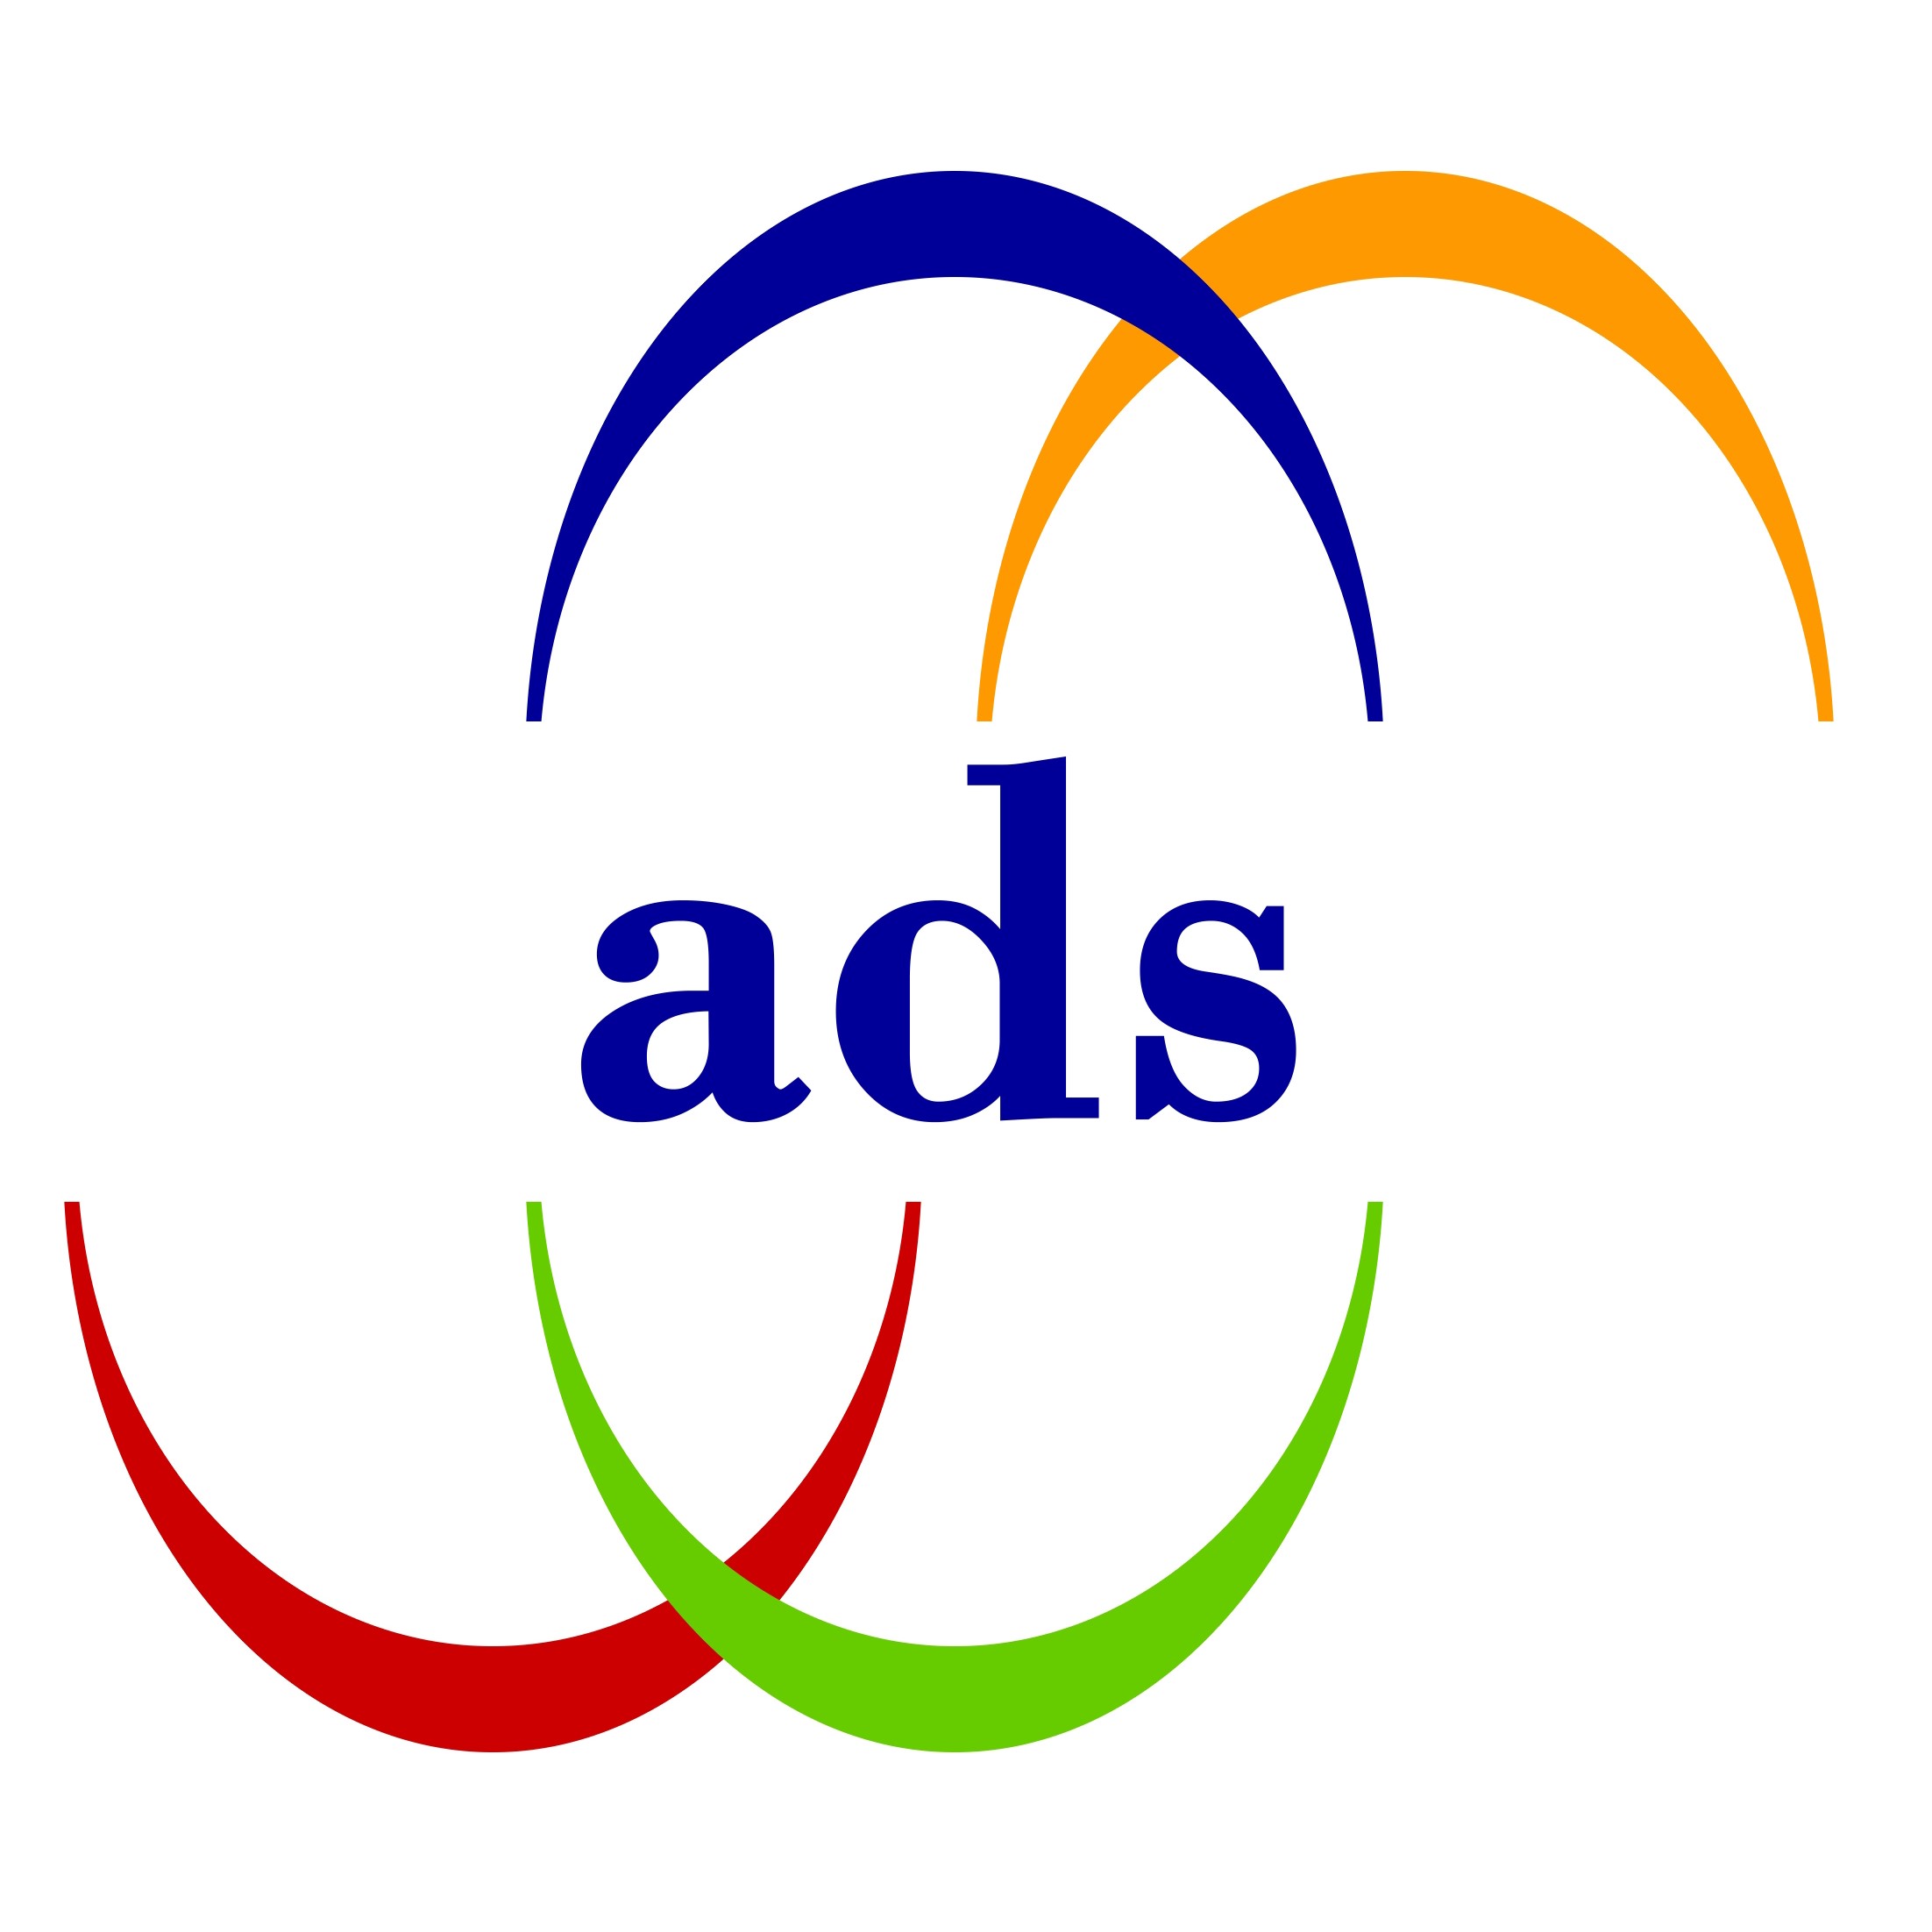 graphic from Aging and Disability Services logo showing letters surrounded by four graphic arcs in blue, orange, red and green